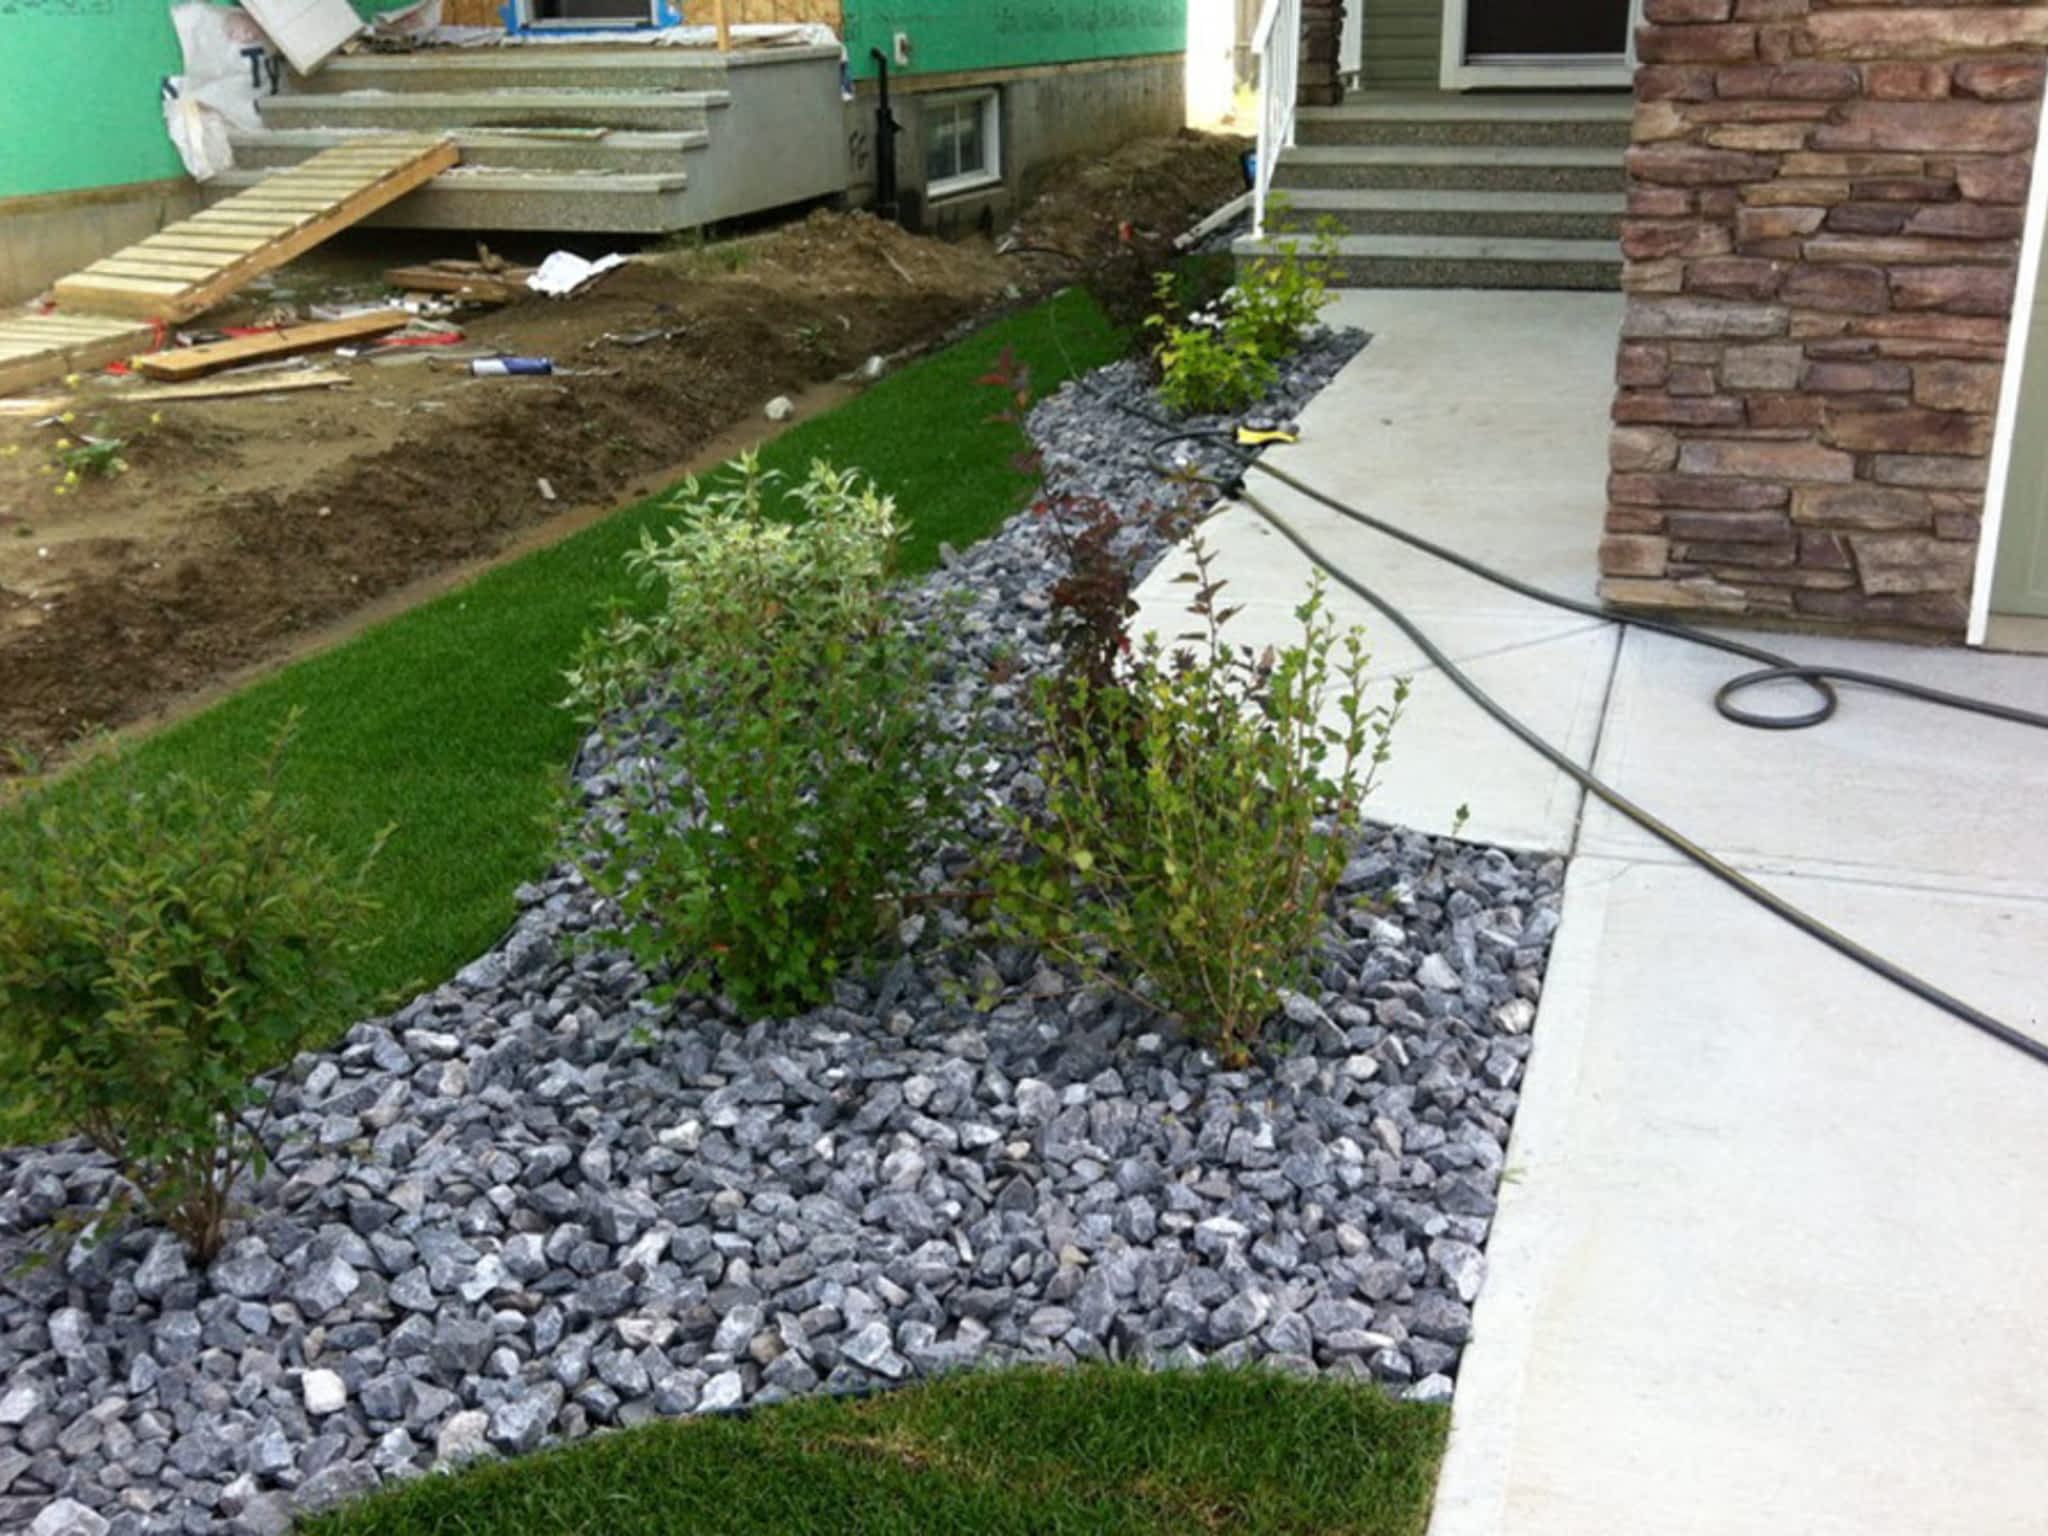 photo All Star Landscaping Sevices Ltd